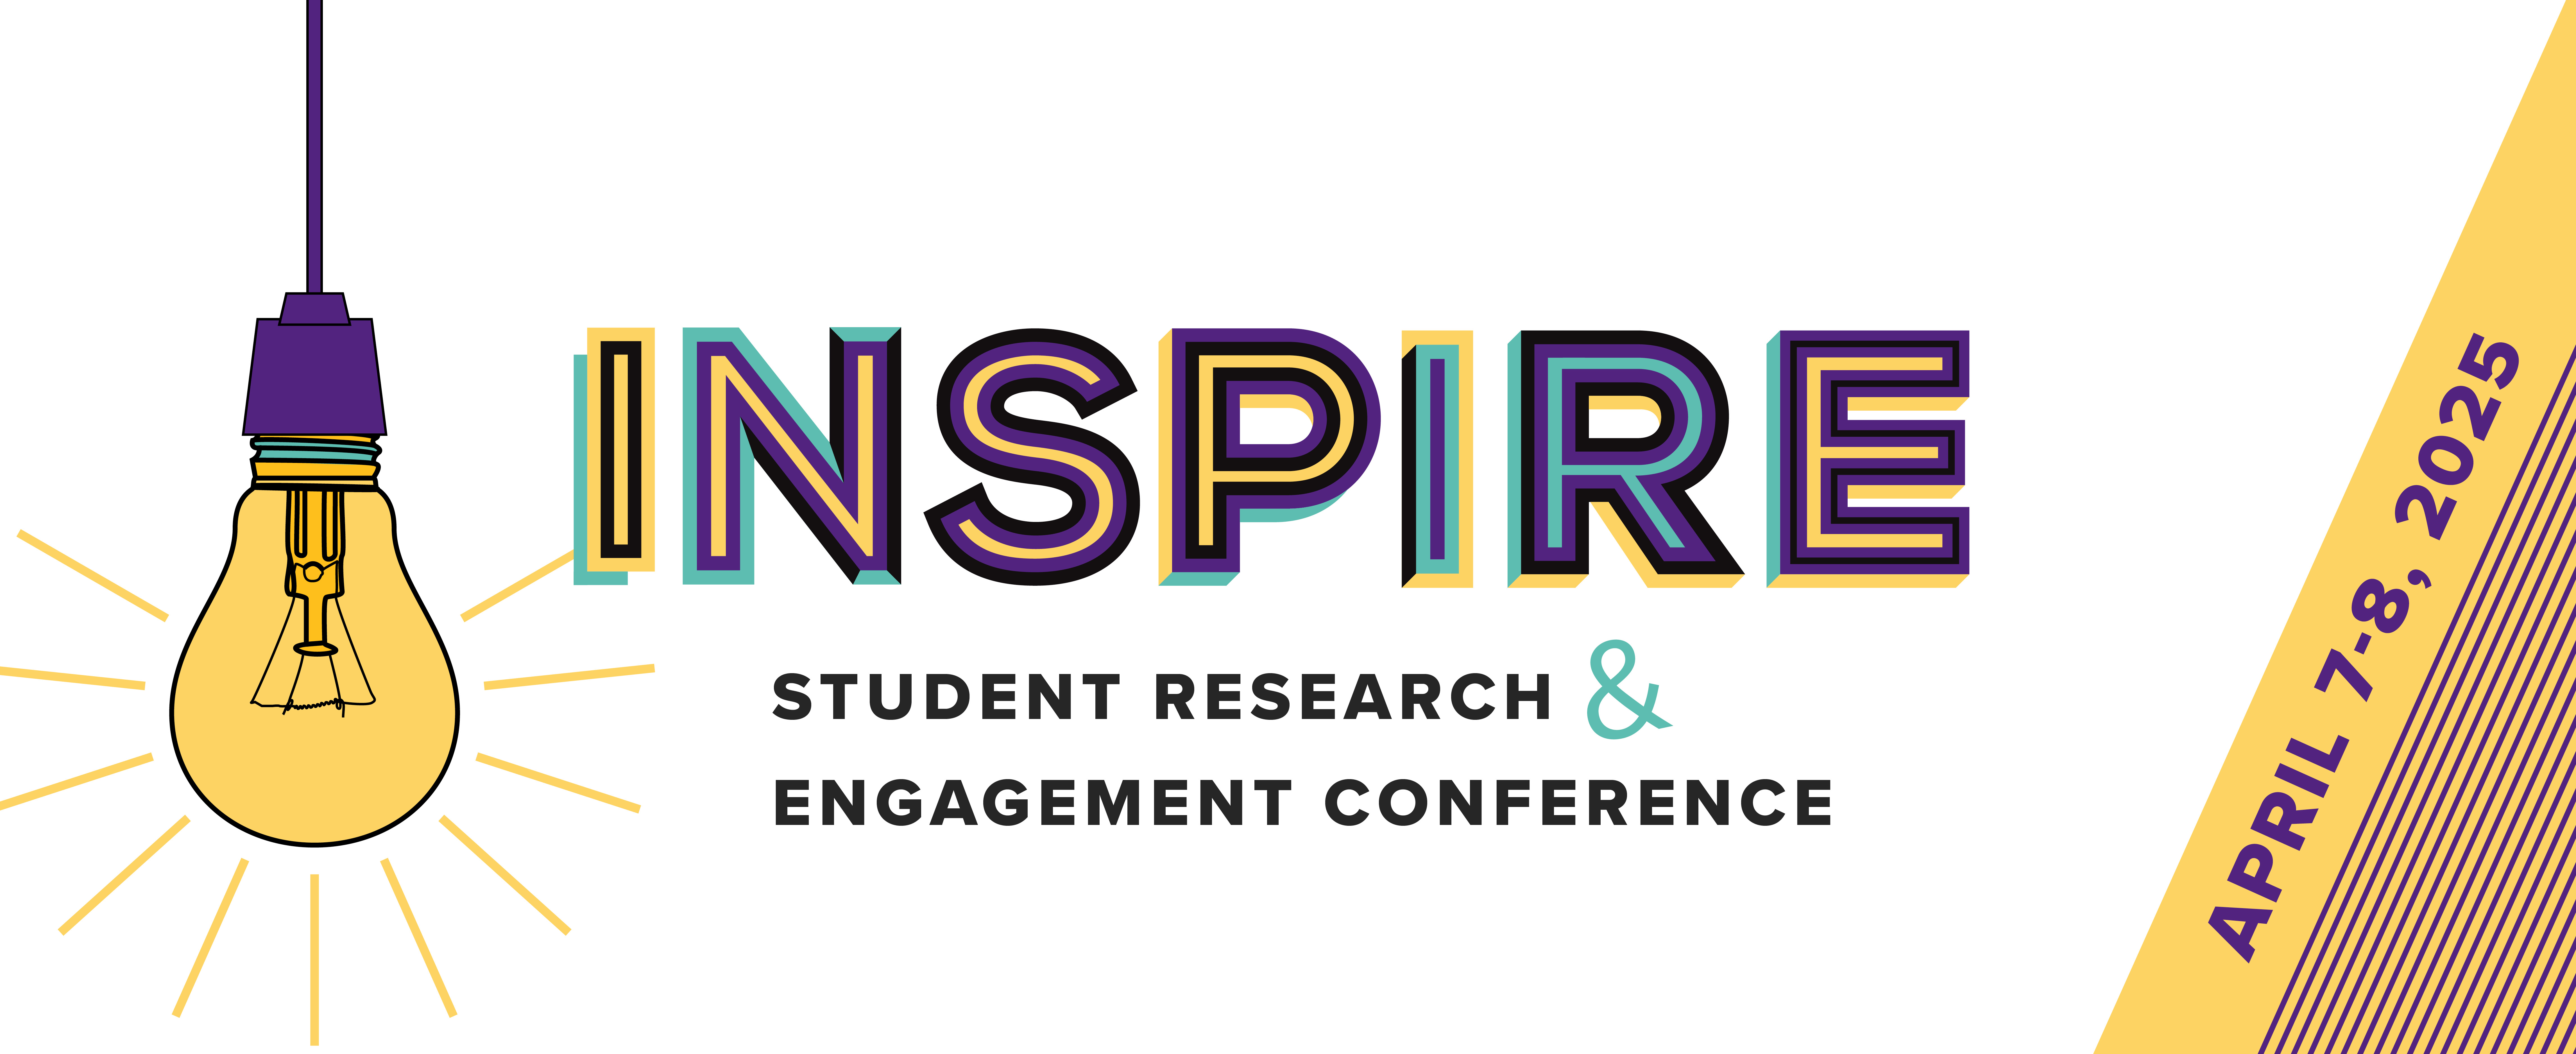 INSPIRE Student Research & Engagement Conference